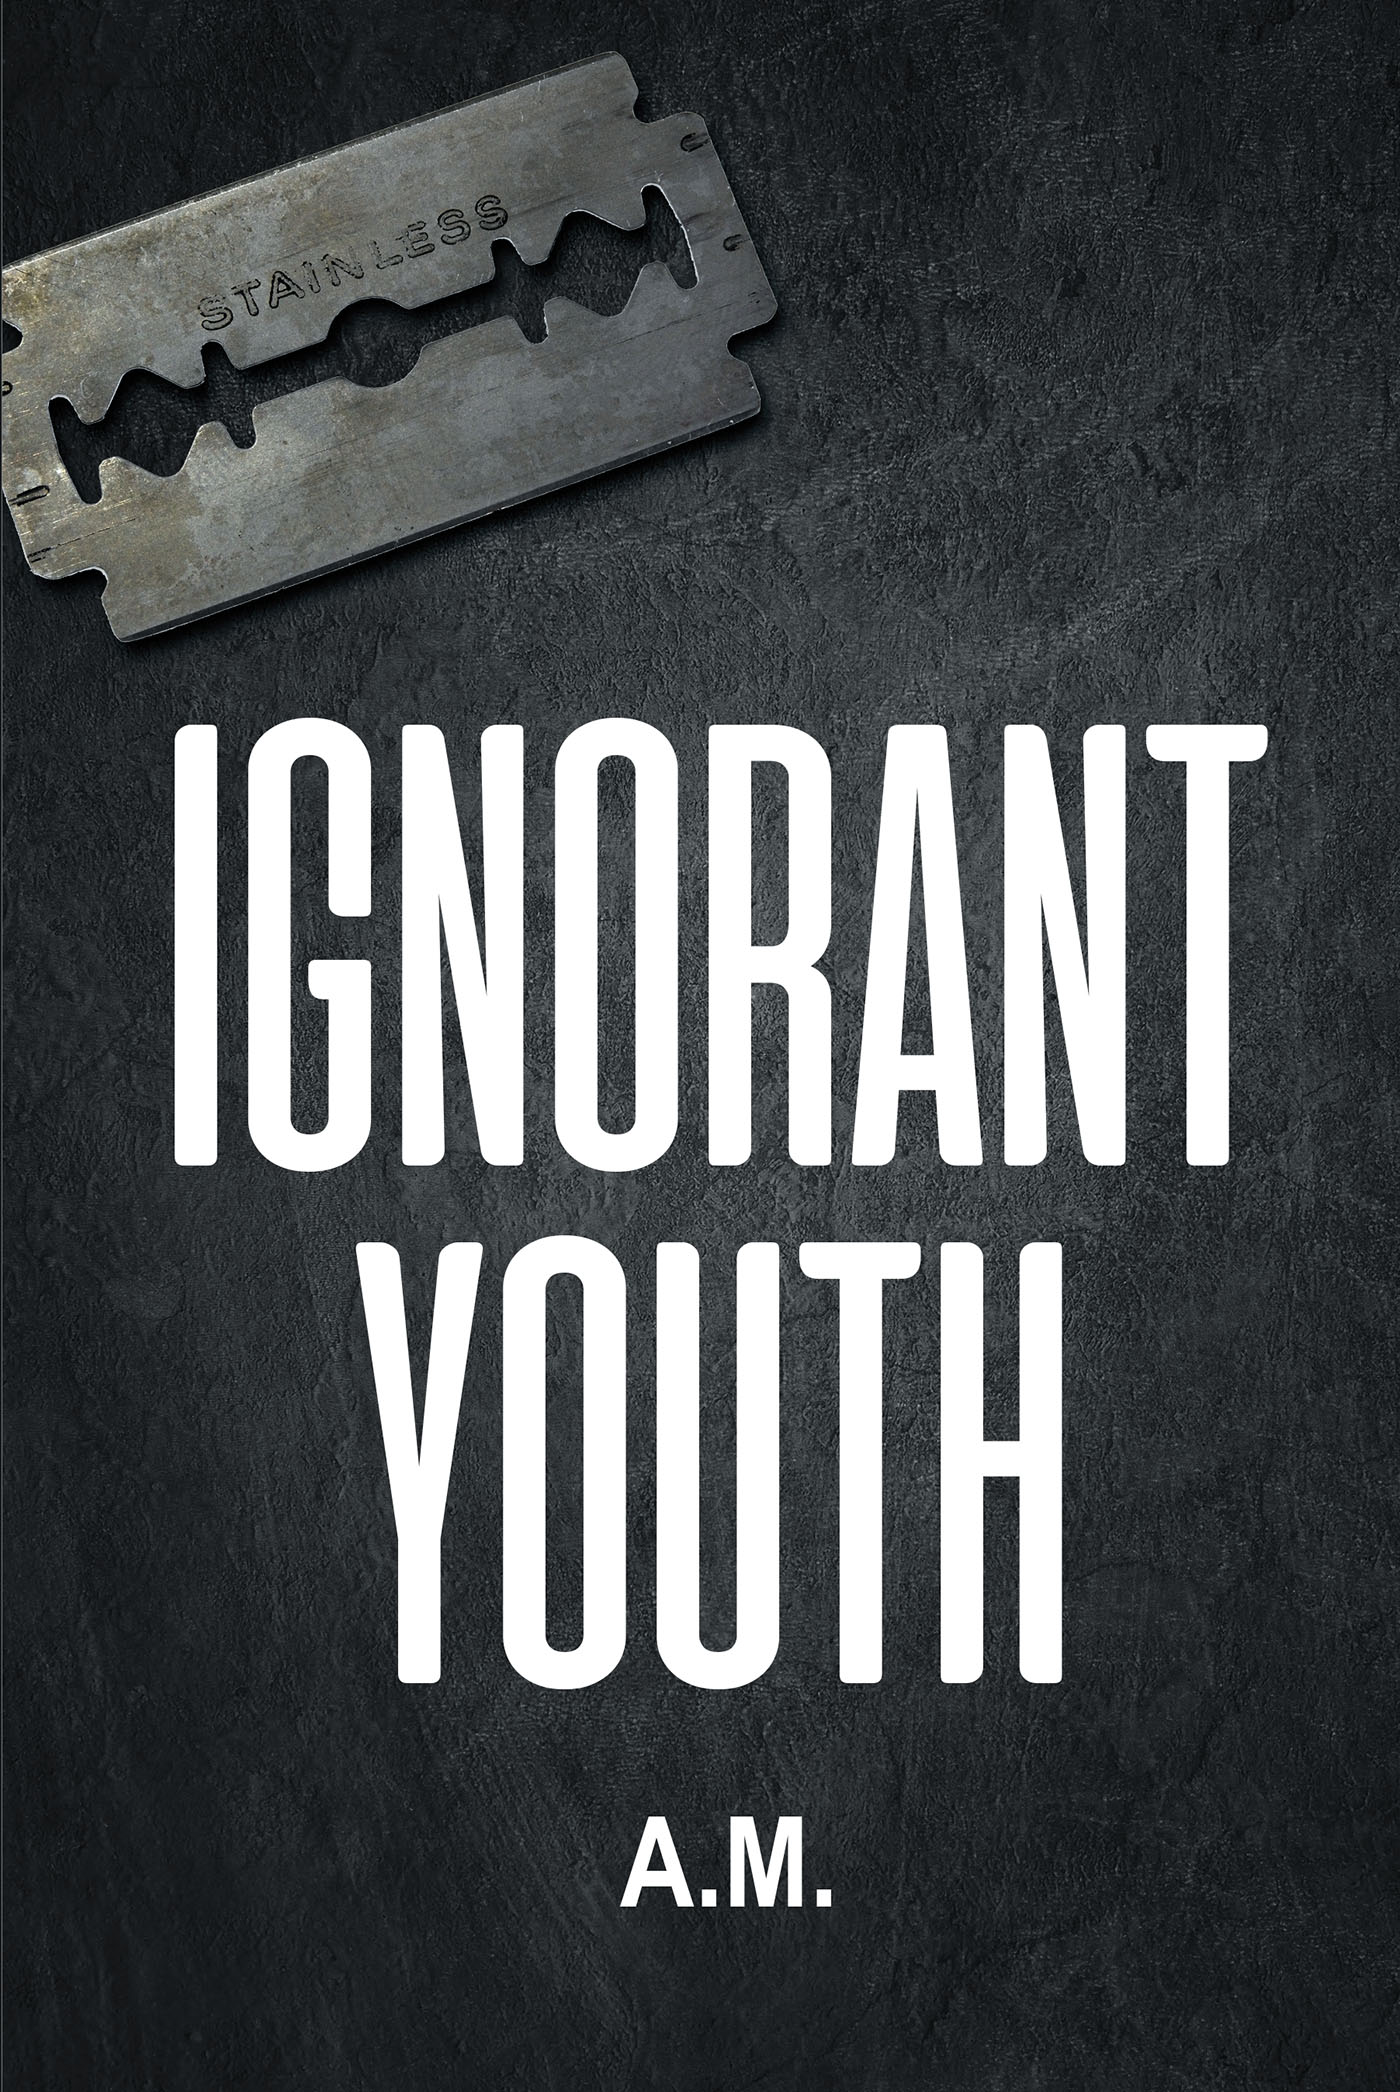 Ignorant Youth Cover Image